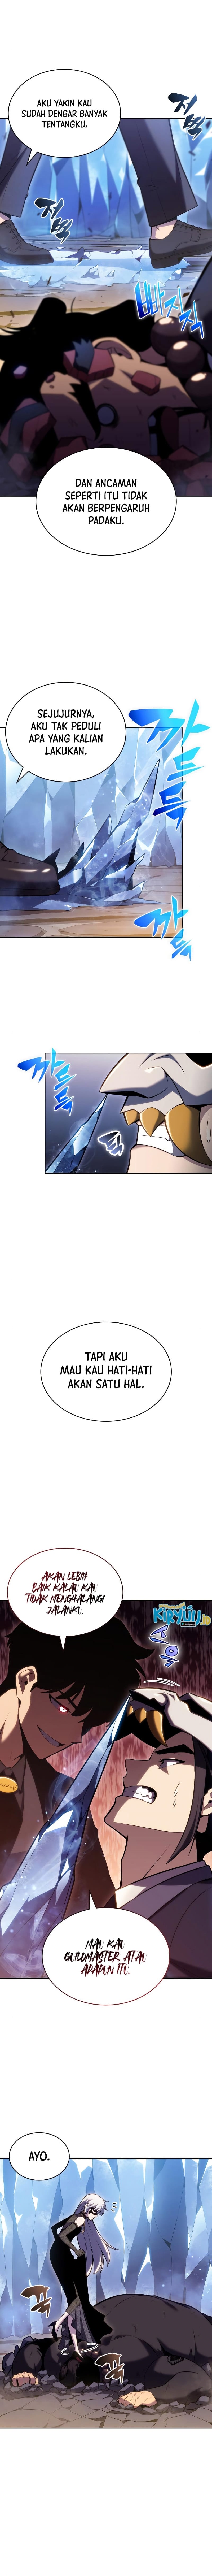 solo-max-level-newbie Chapter 98